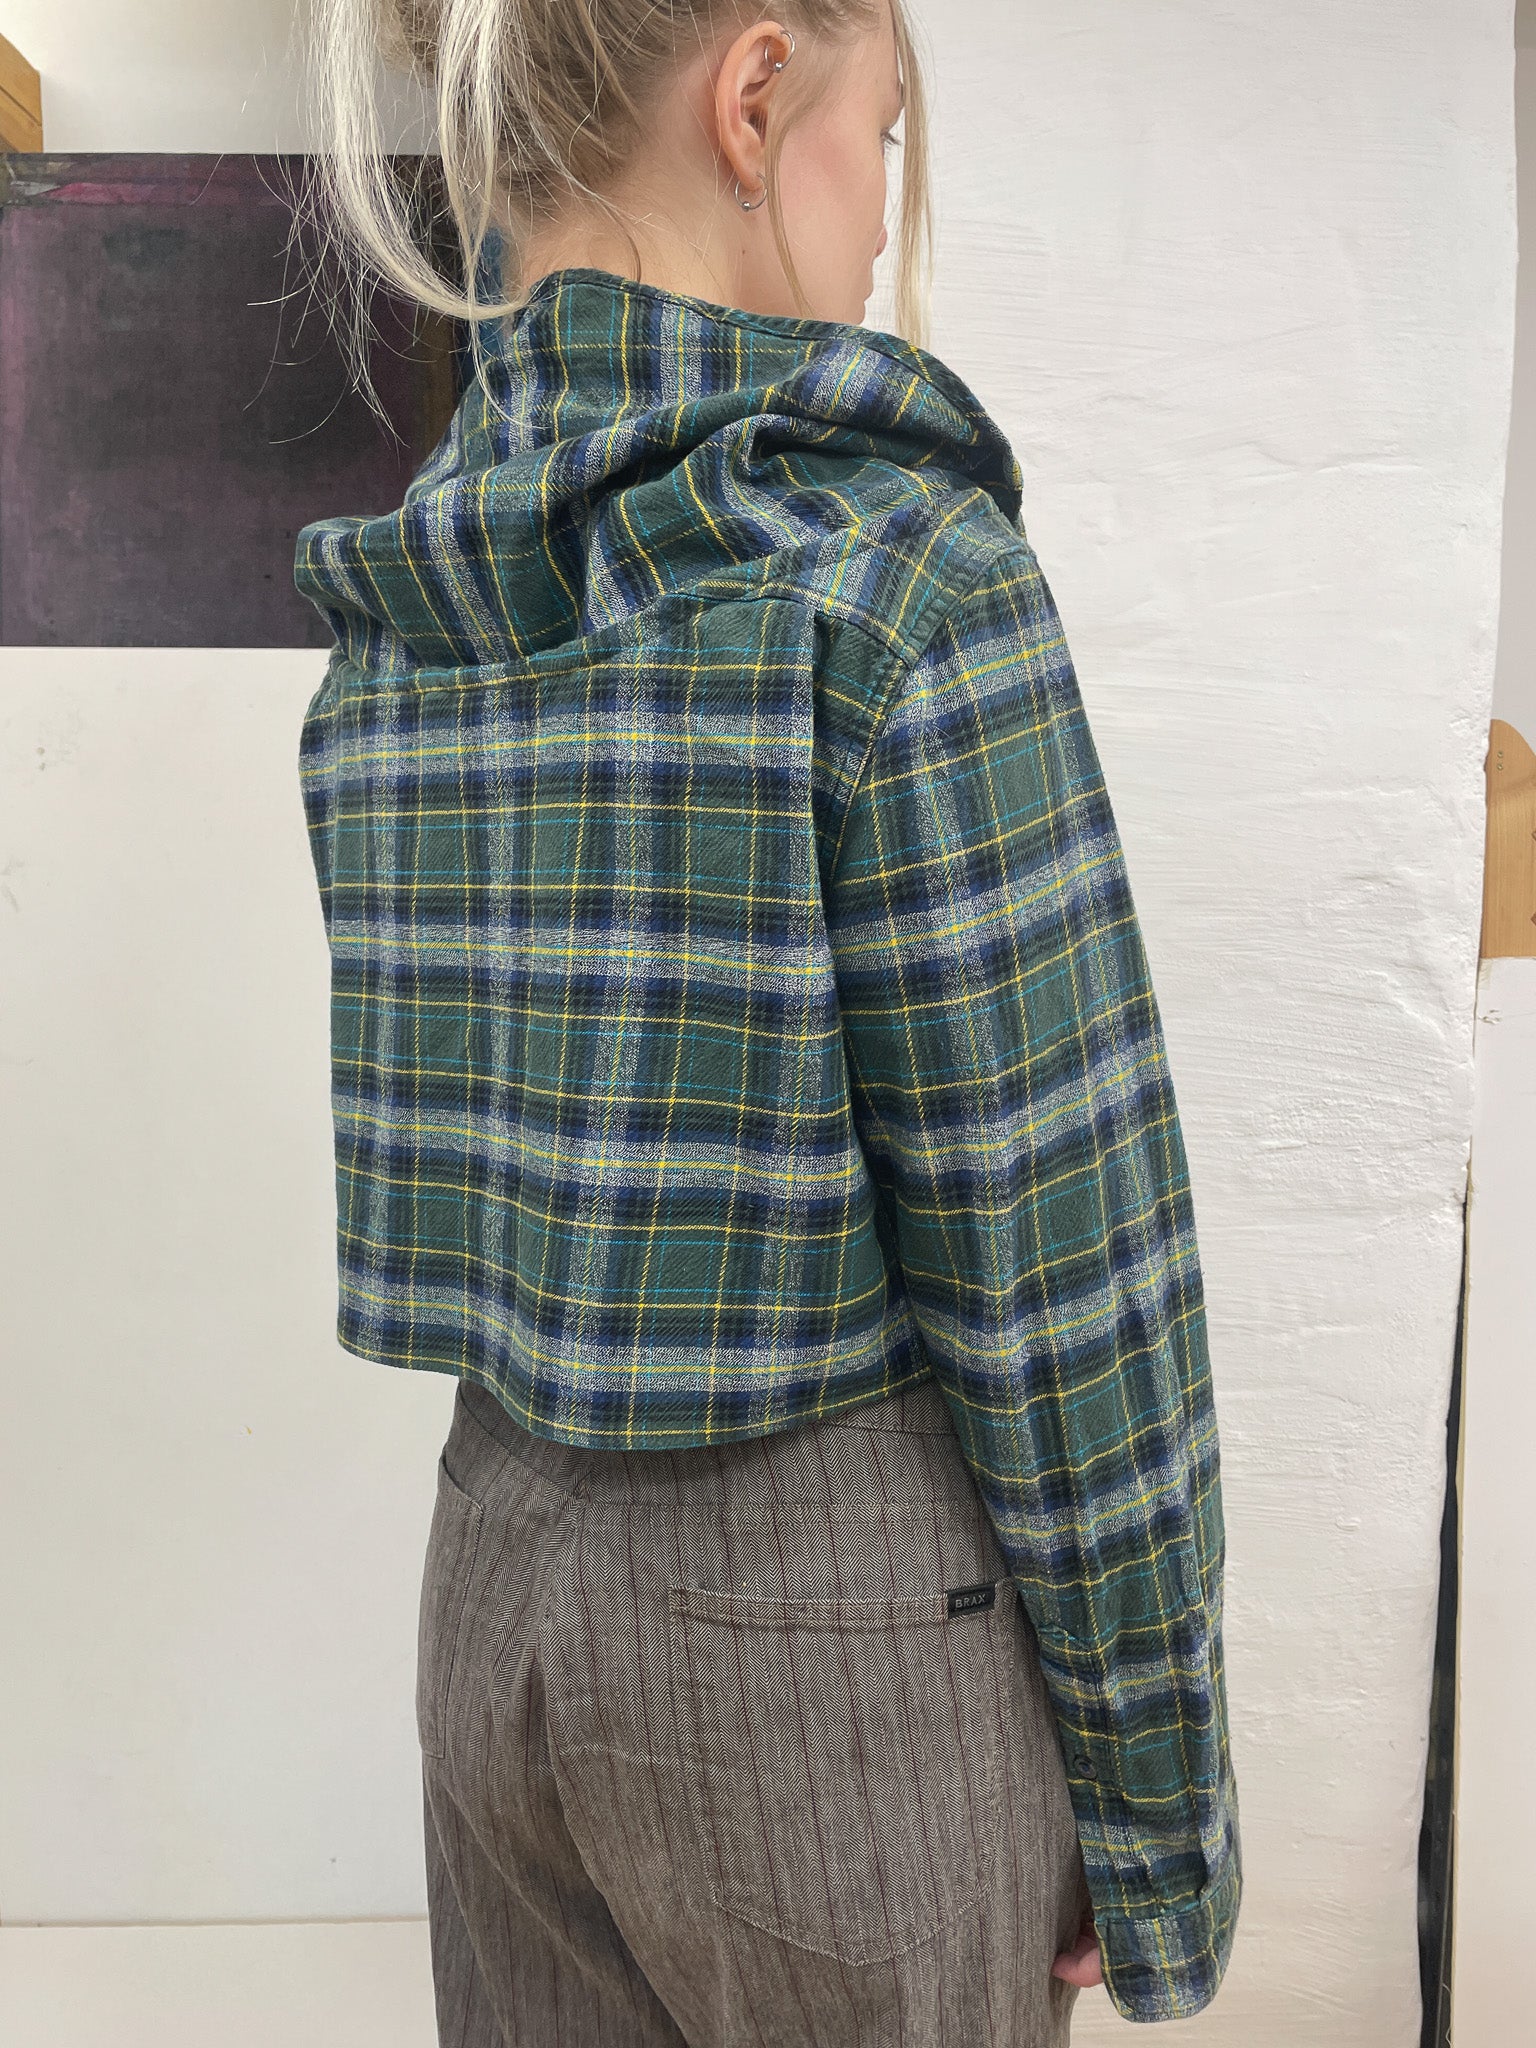 'No strings' Flannel